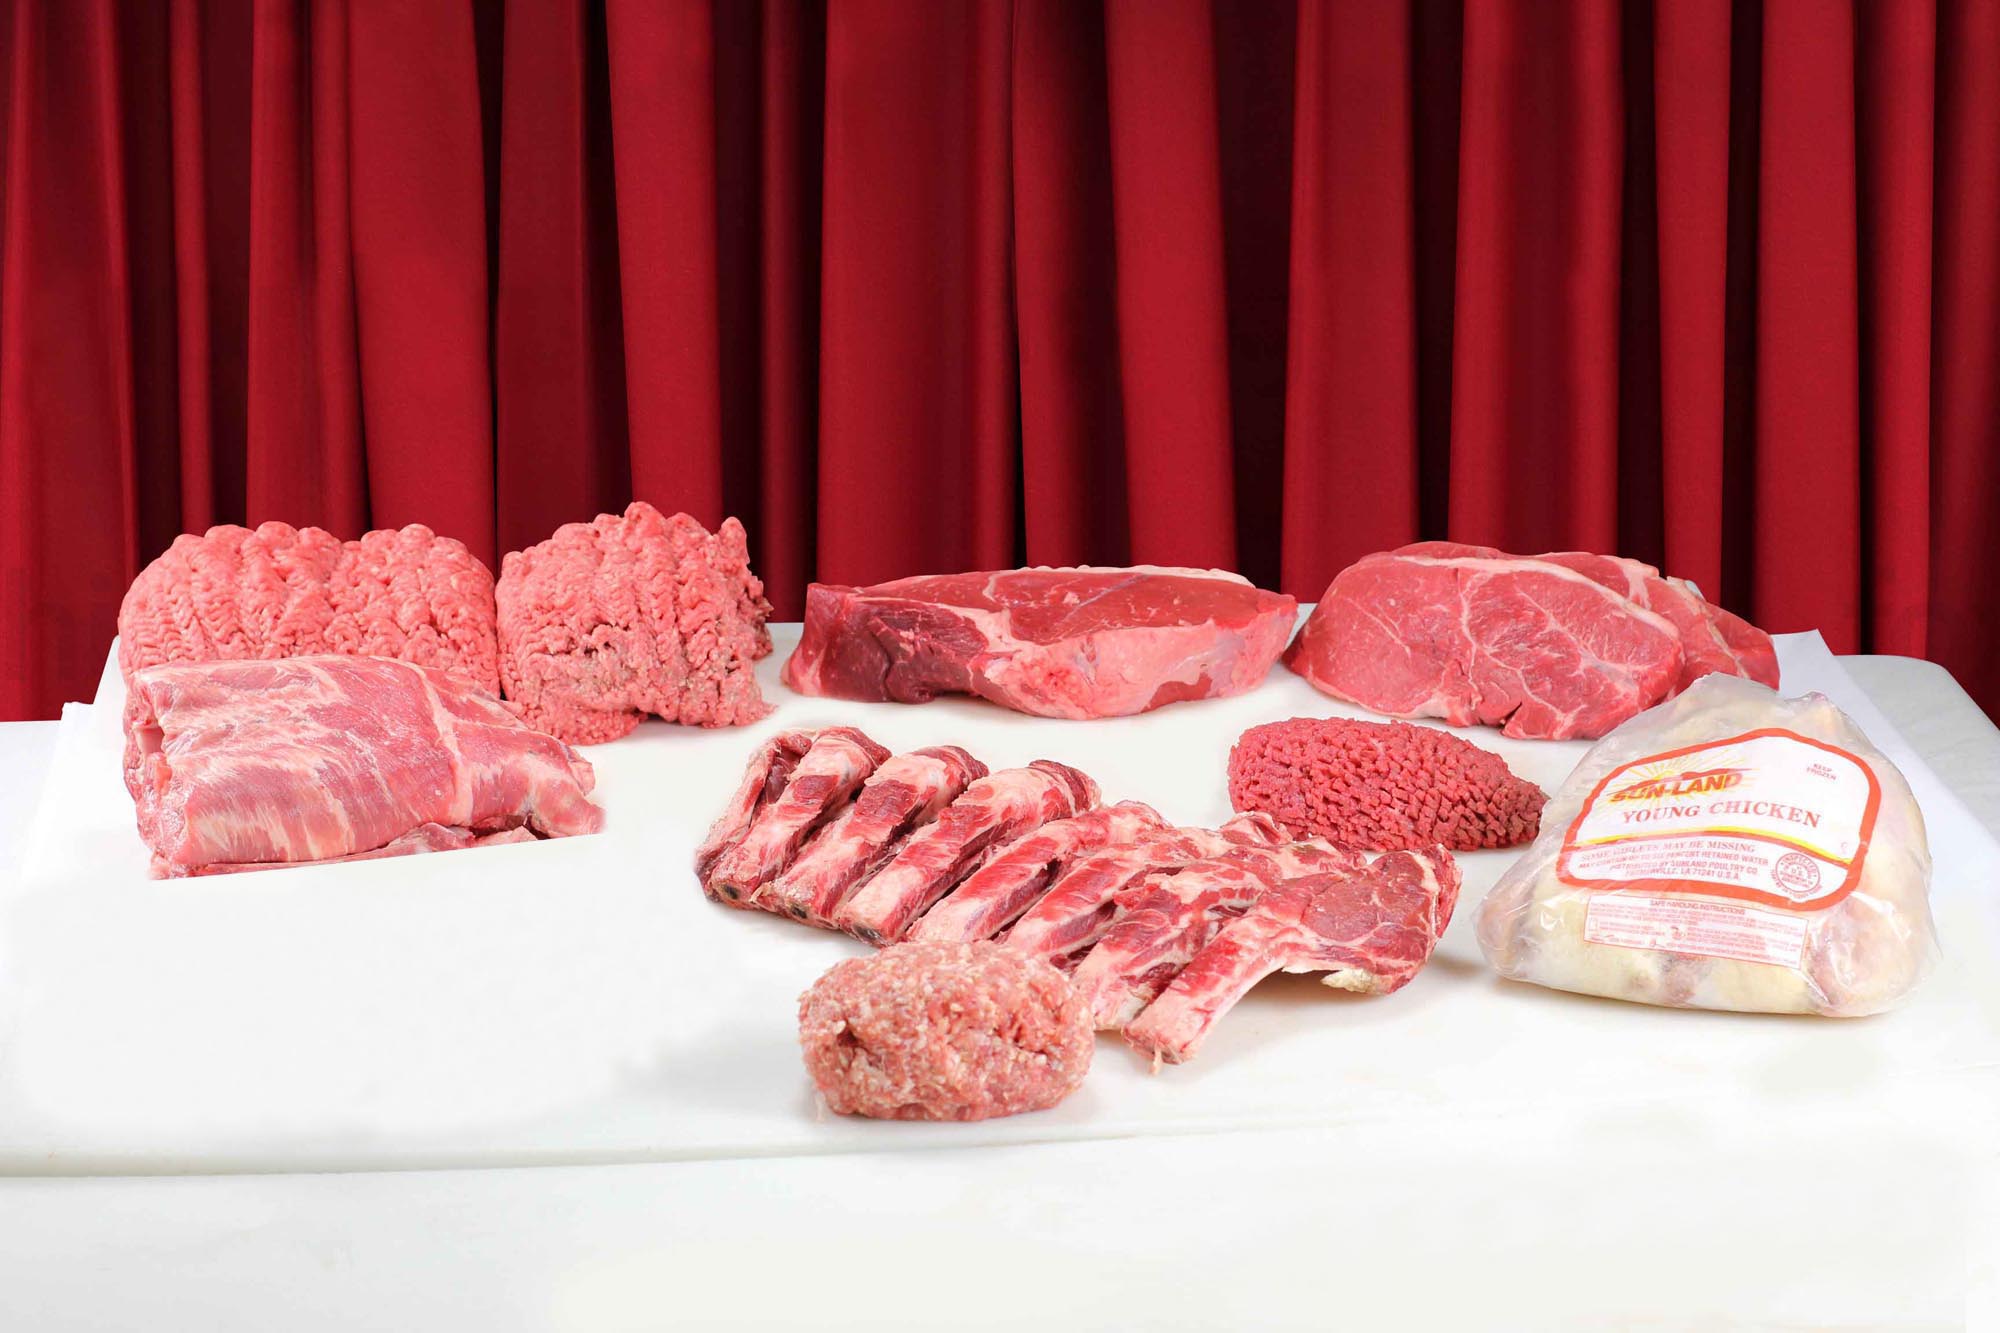 This image icon displays the Purdy's Quality Meats Family Pack image